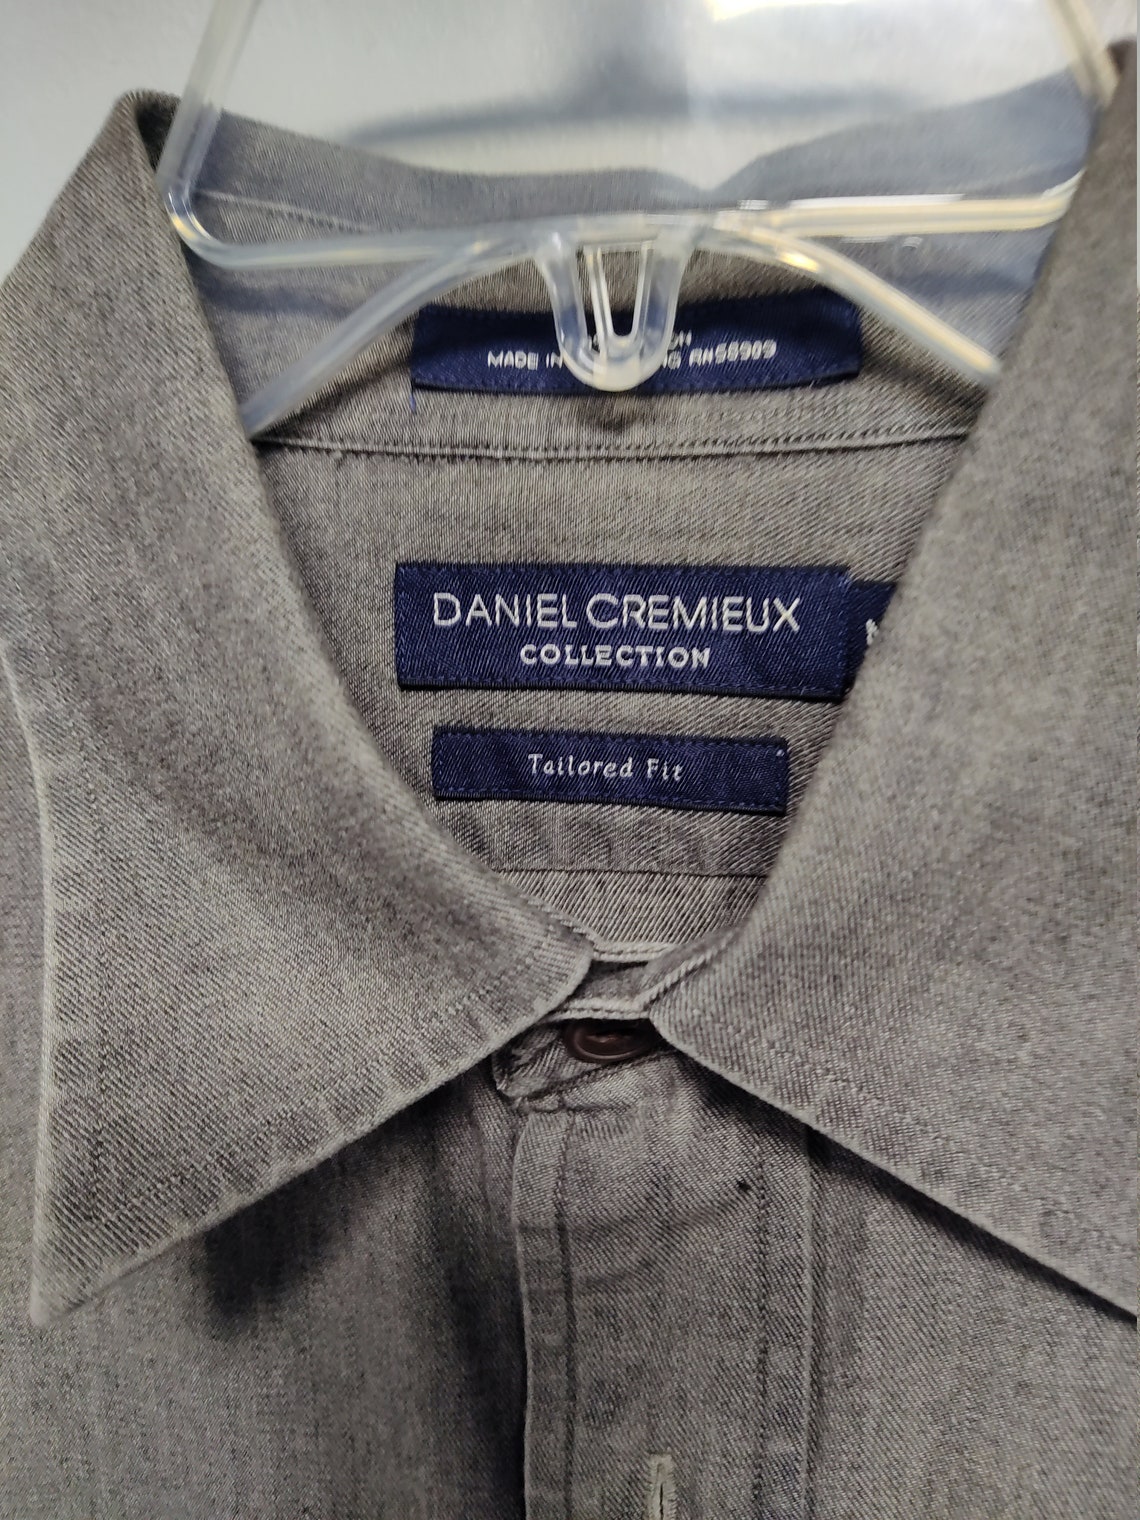 Vintage Mens Long Sleeve Shirt by DANIEL CREMIEUX COLLECTION | Etsy